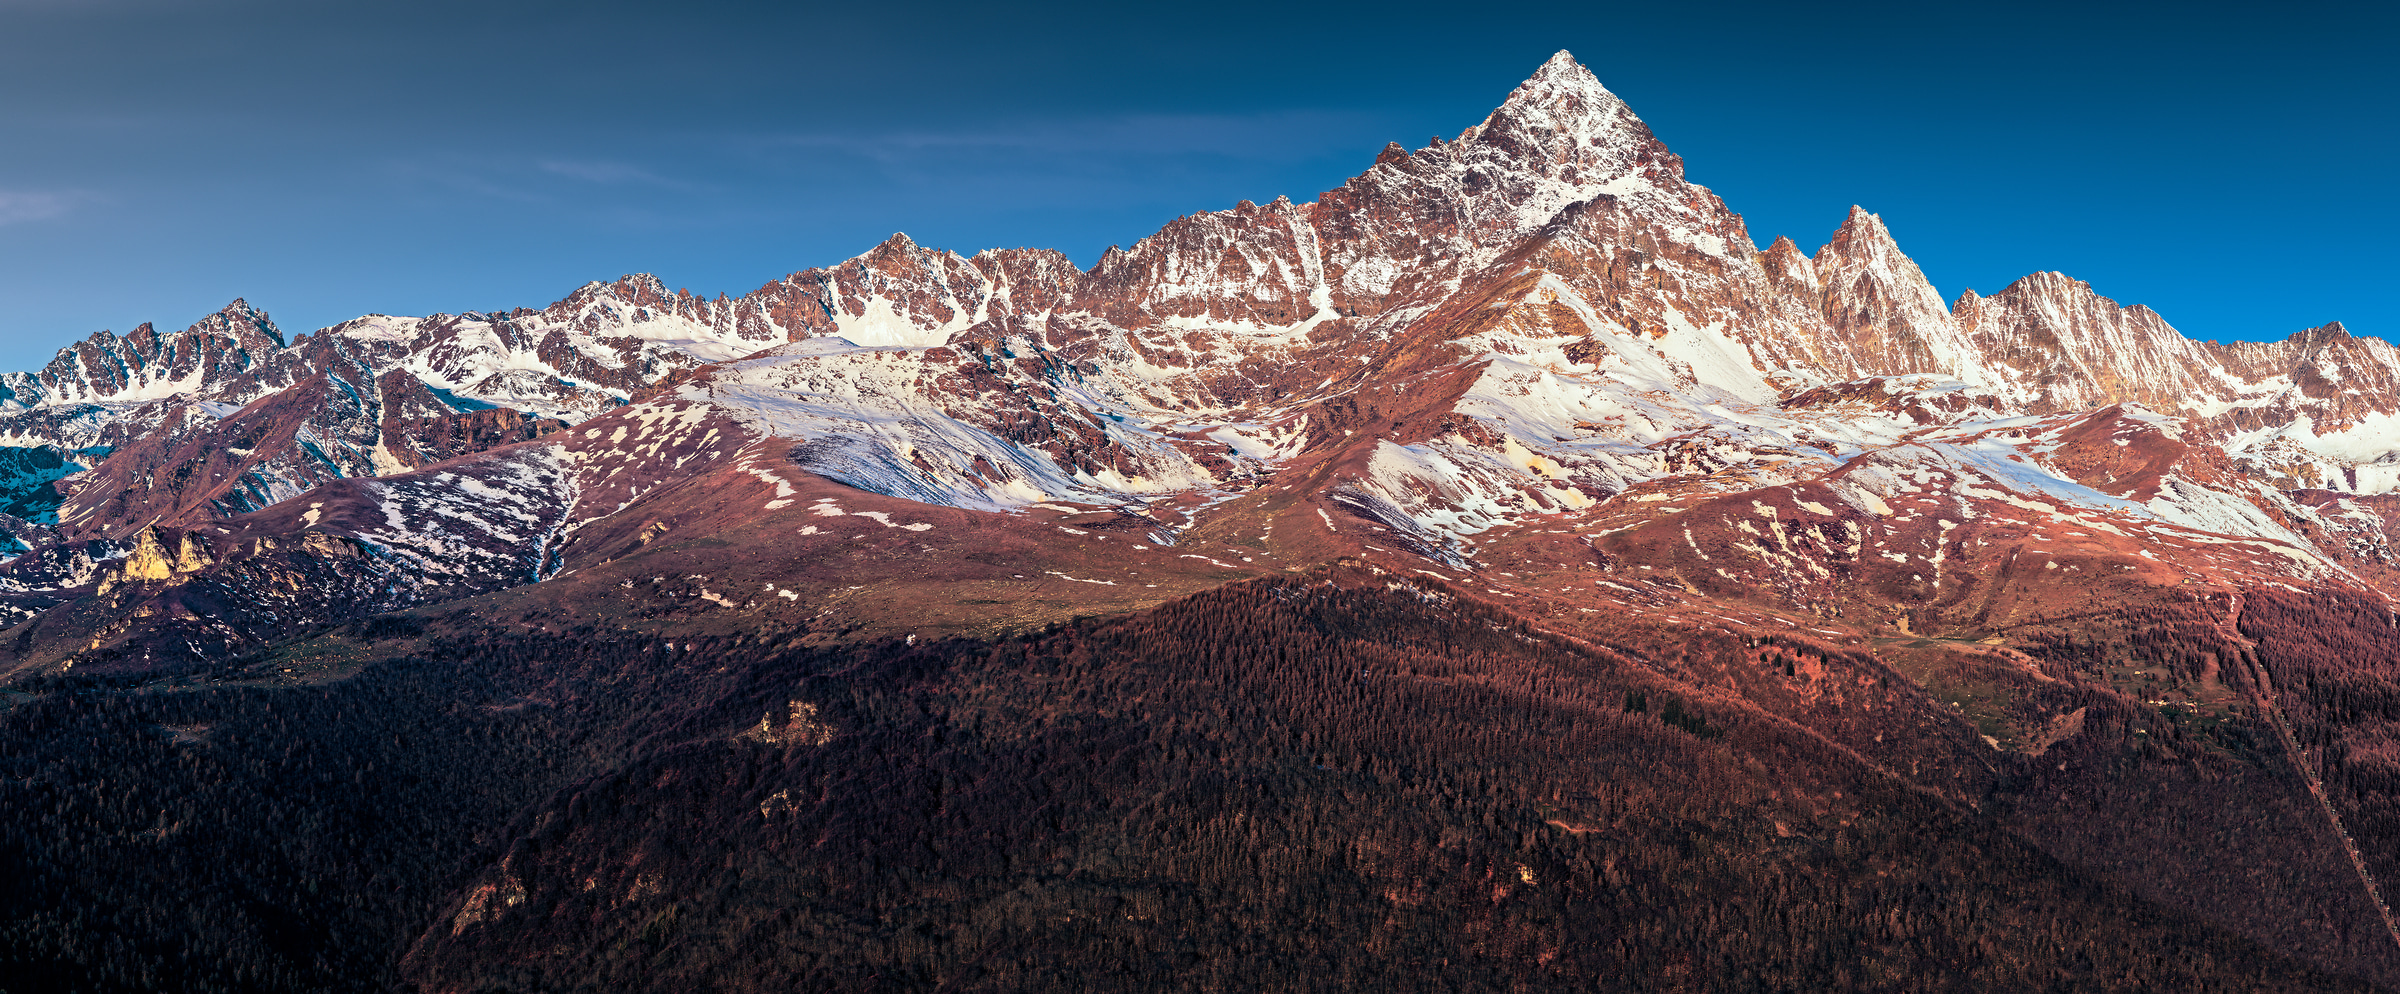 1,698 megapixels! A very high resolution, large-format VAST photo print of Monviso in the Alps; landscape photograph created by Duilio Fiorille in Monviso, Ostana, Piedmont, Italy.